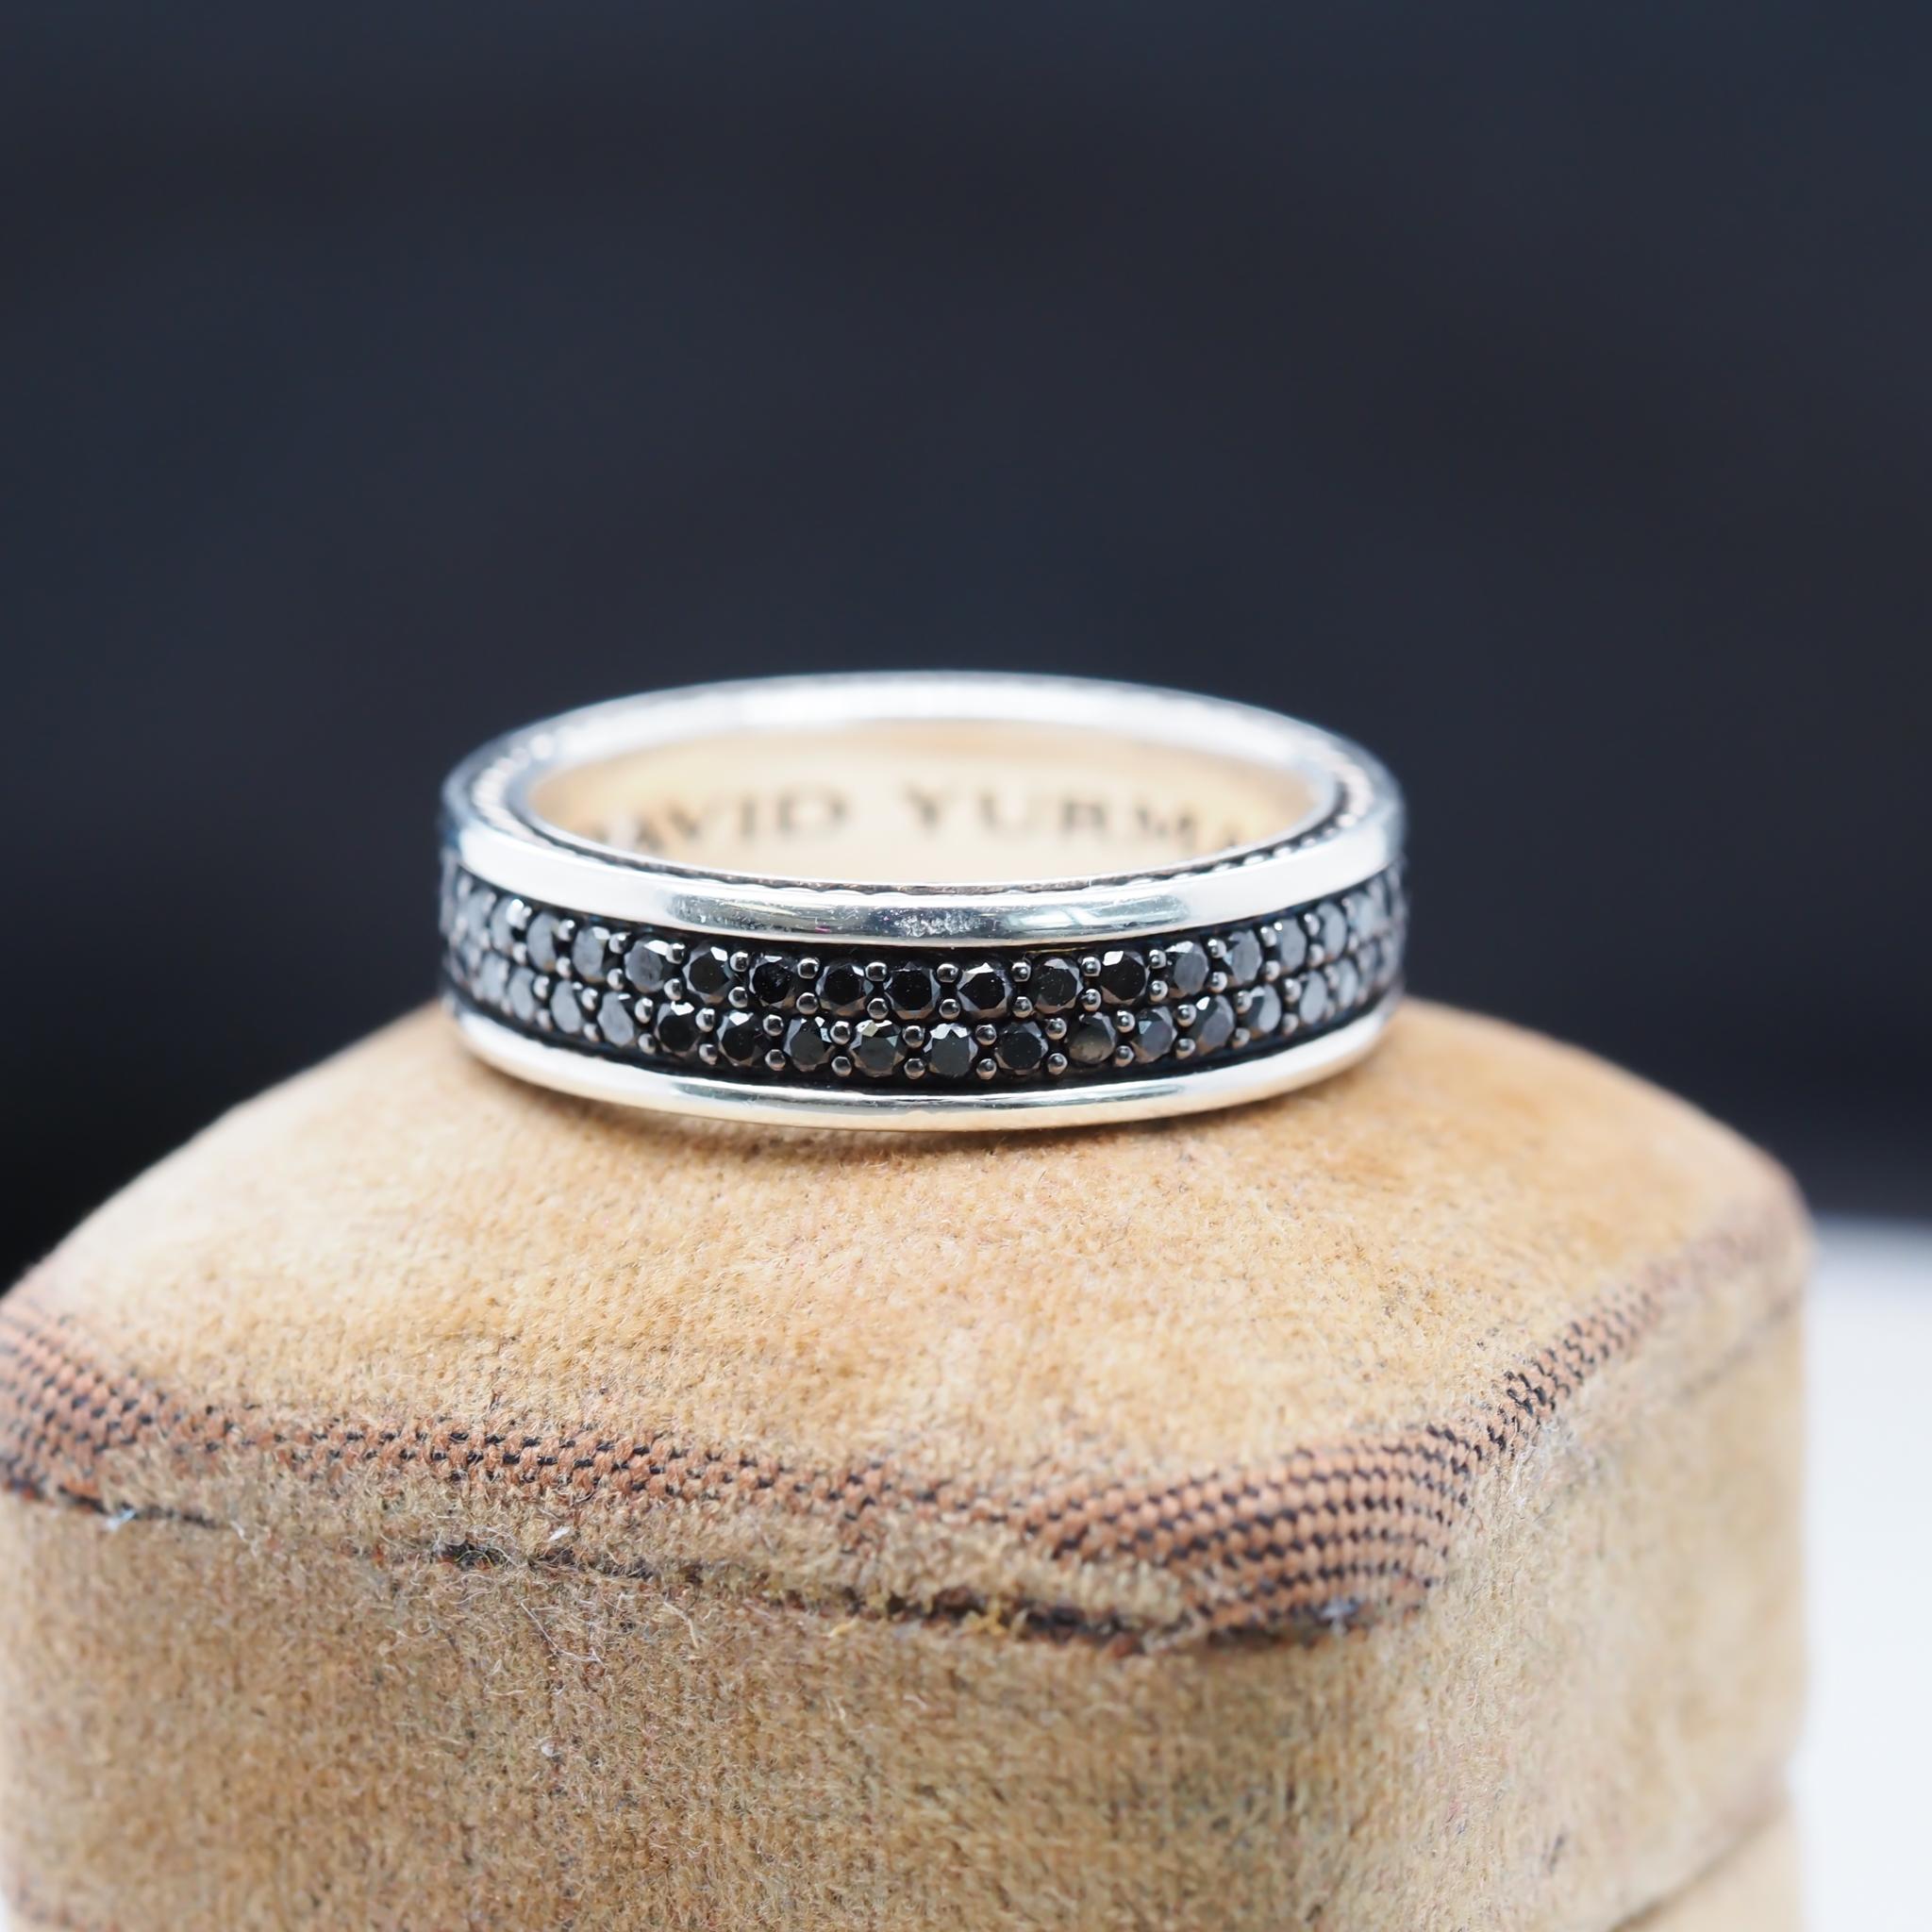 Ring Size: 10.25
Metal Type: Sterling Silver [Hallmarked, and Tested]
Weight: 7.8 grams
‌
Diamond Details:
Weight: 1.50ct, total weight
Cut: Round
Color: Black
‌
Band Width: 6.25 mm
Condition: Excellent